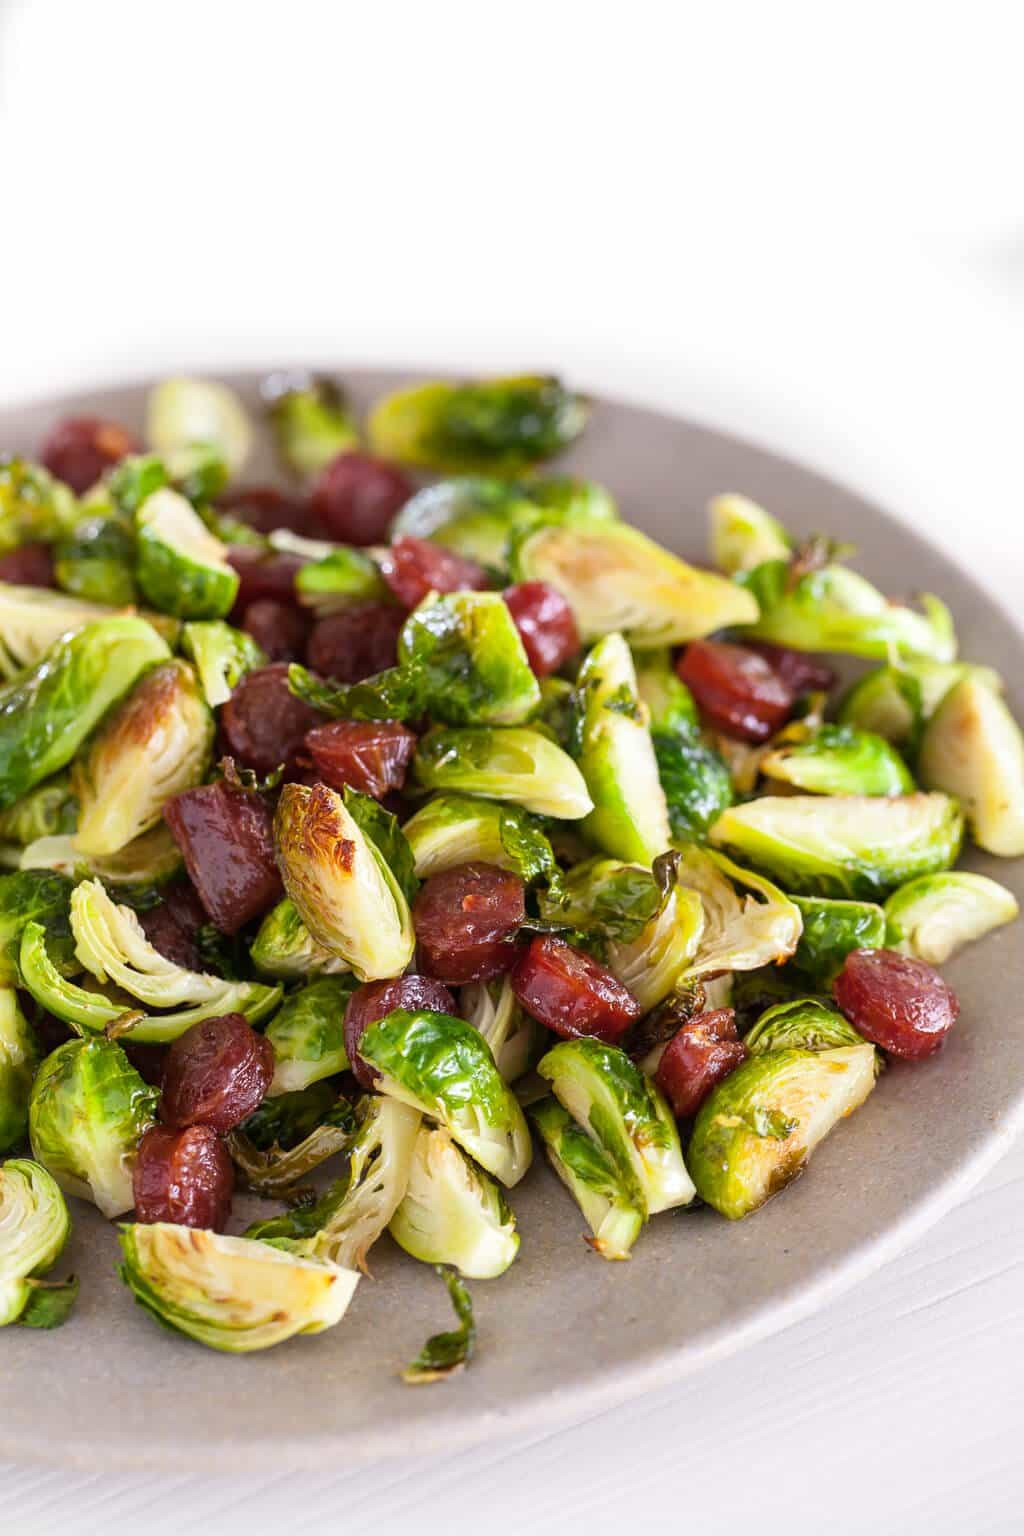 Chinese Sausage Recipes
 Roasted Brussels Sprouts with Chinese Sausage Recipe